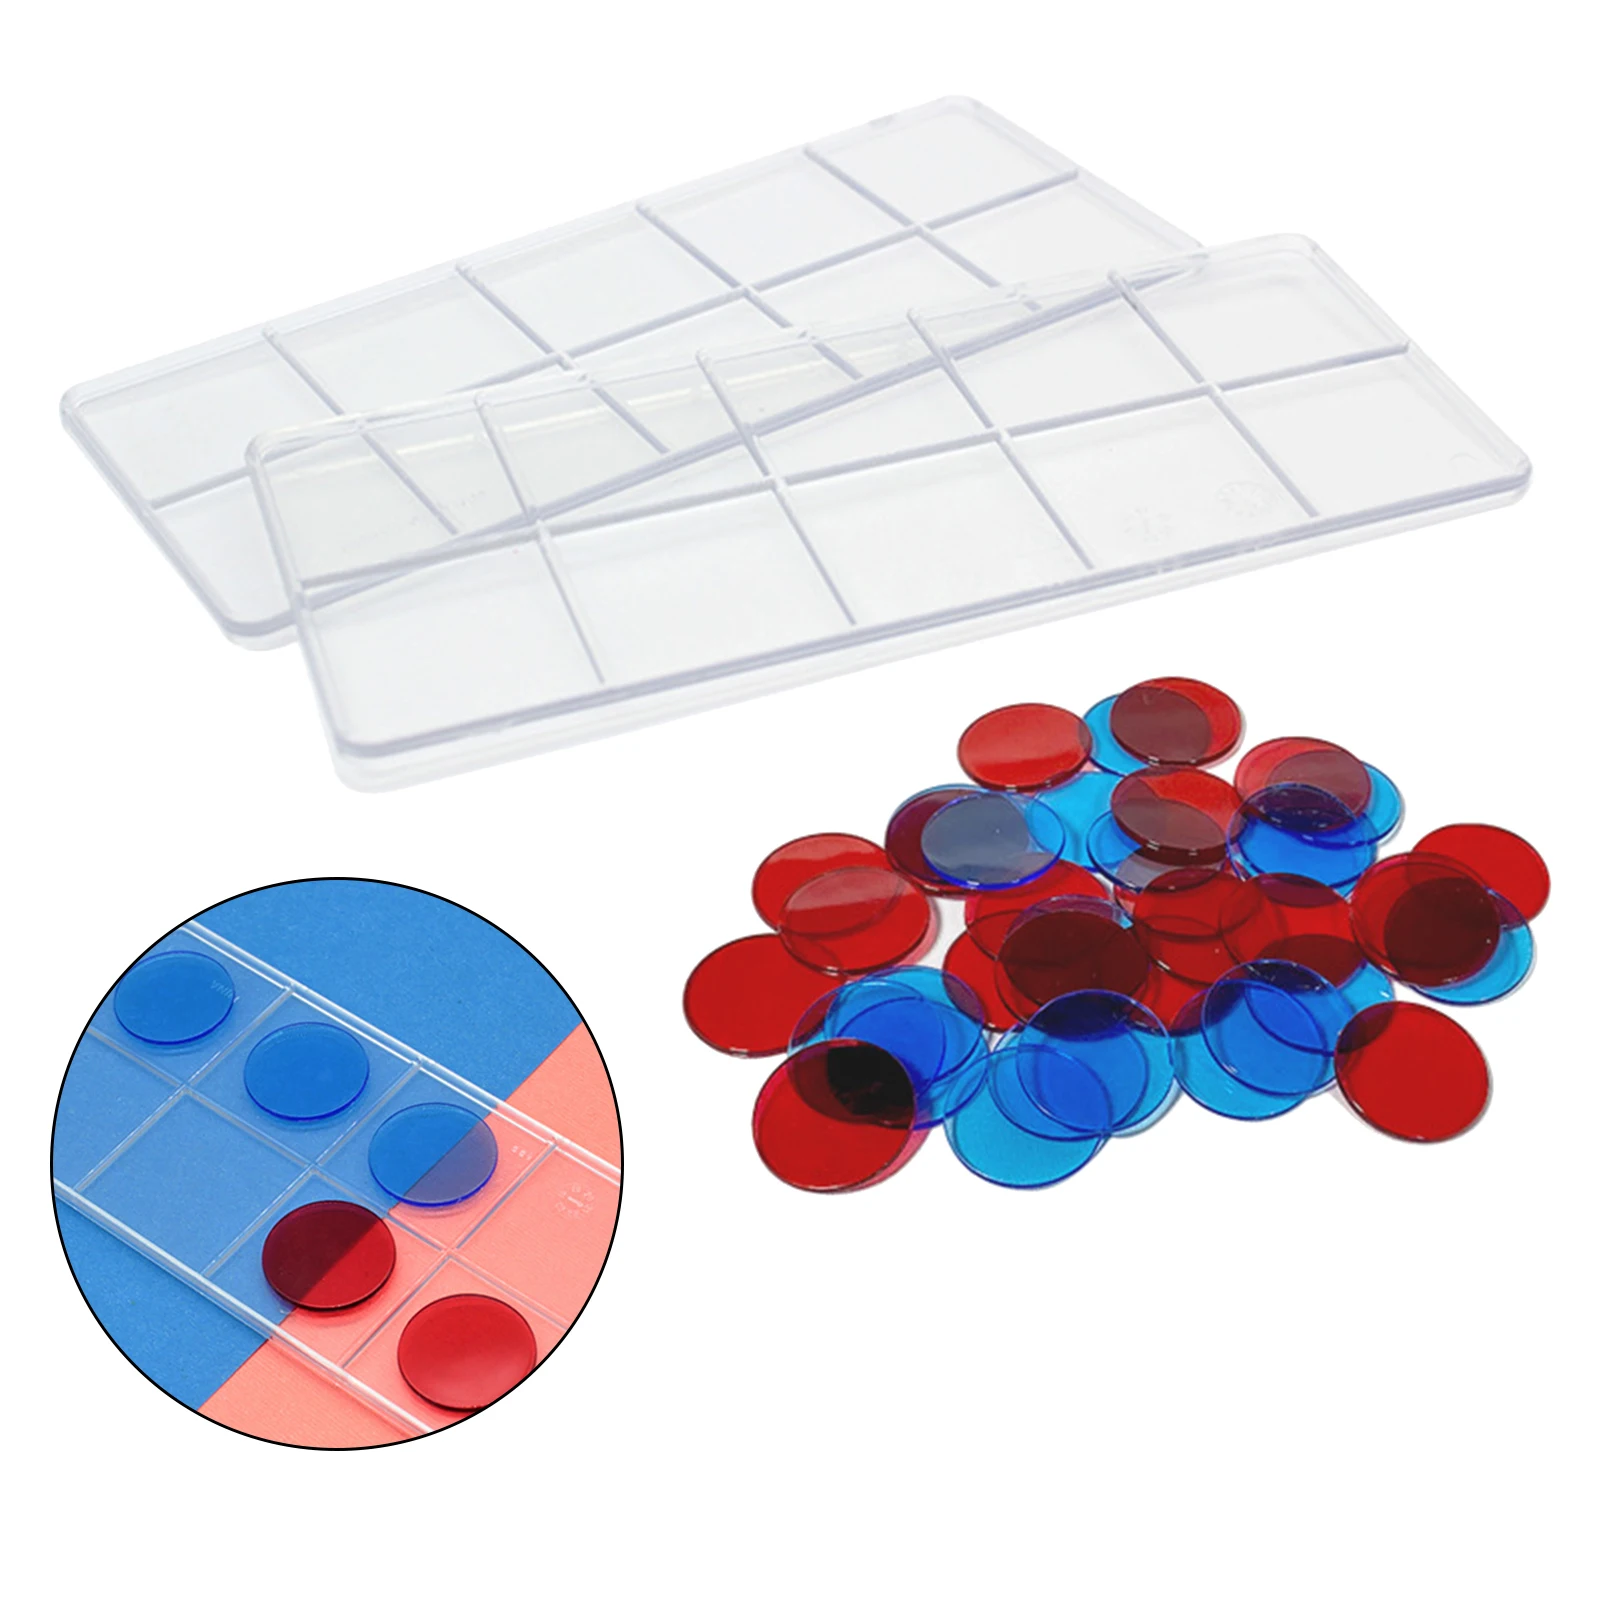 2 Ten Frames and 40 Math Counters for Kids